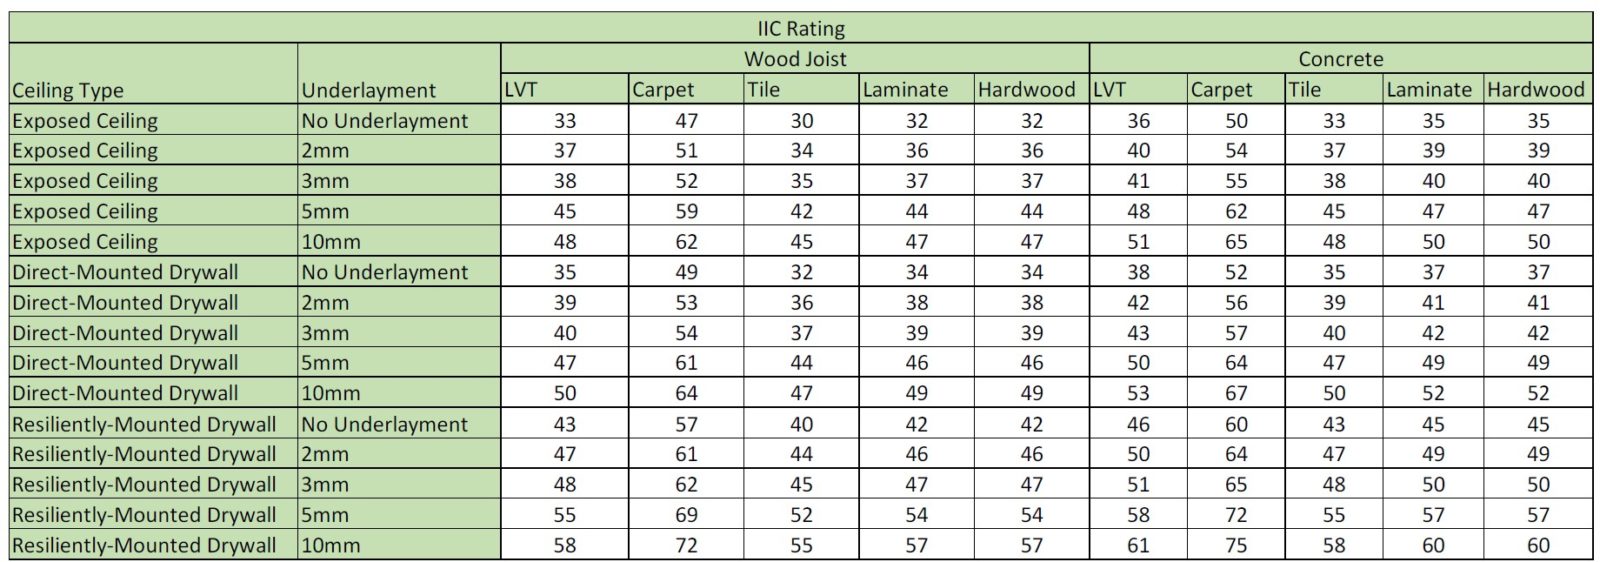 IIC Rating Chart for Different Flooring Types